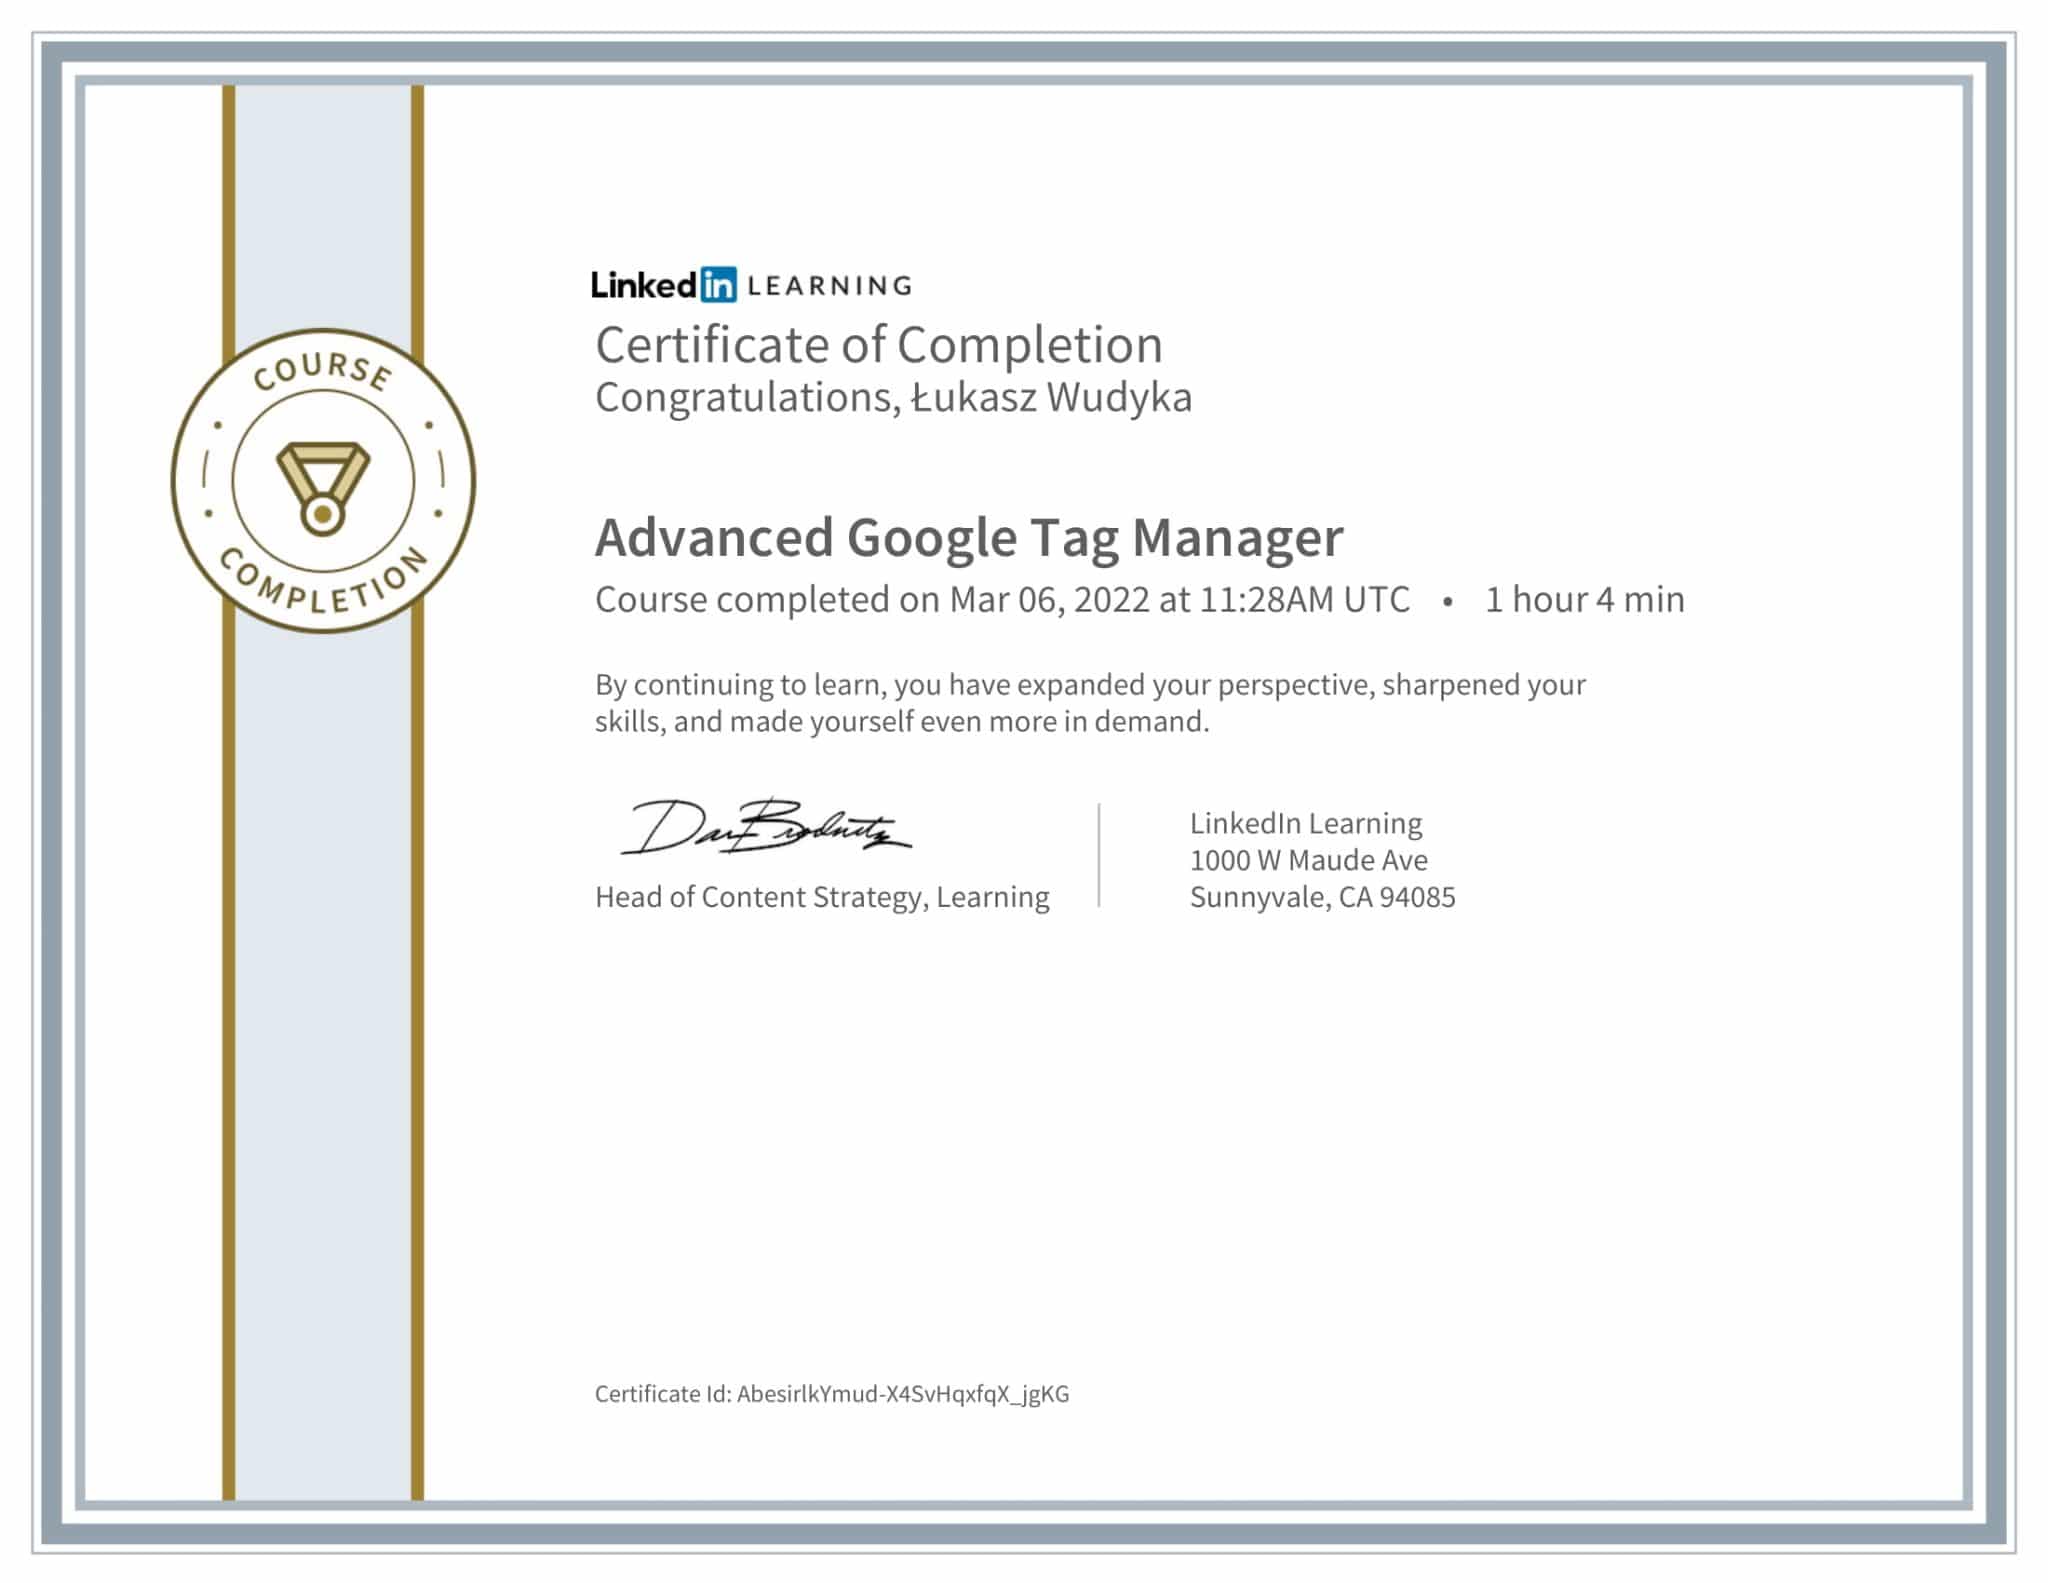 CertificateOfCompletion_Advanced Google Tag Manager-1